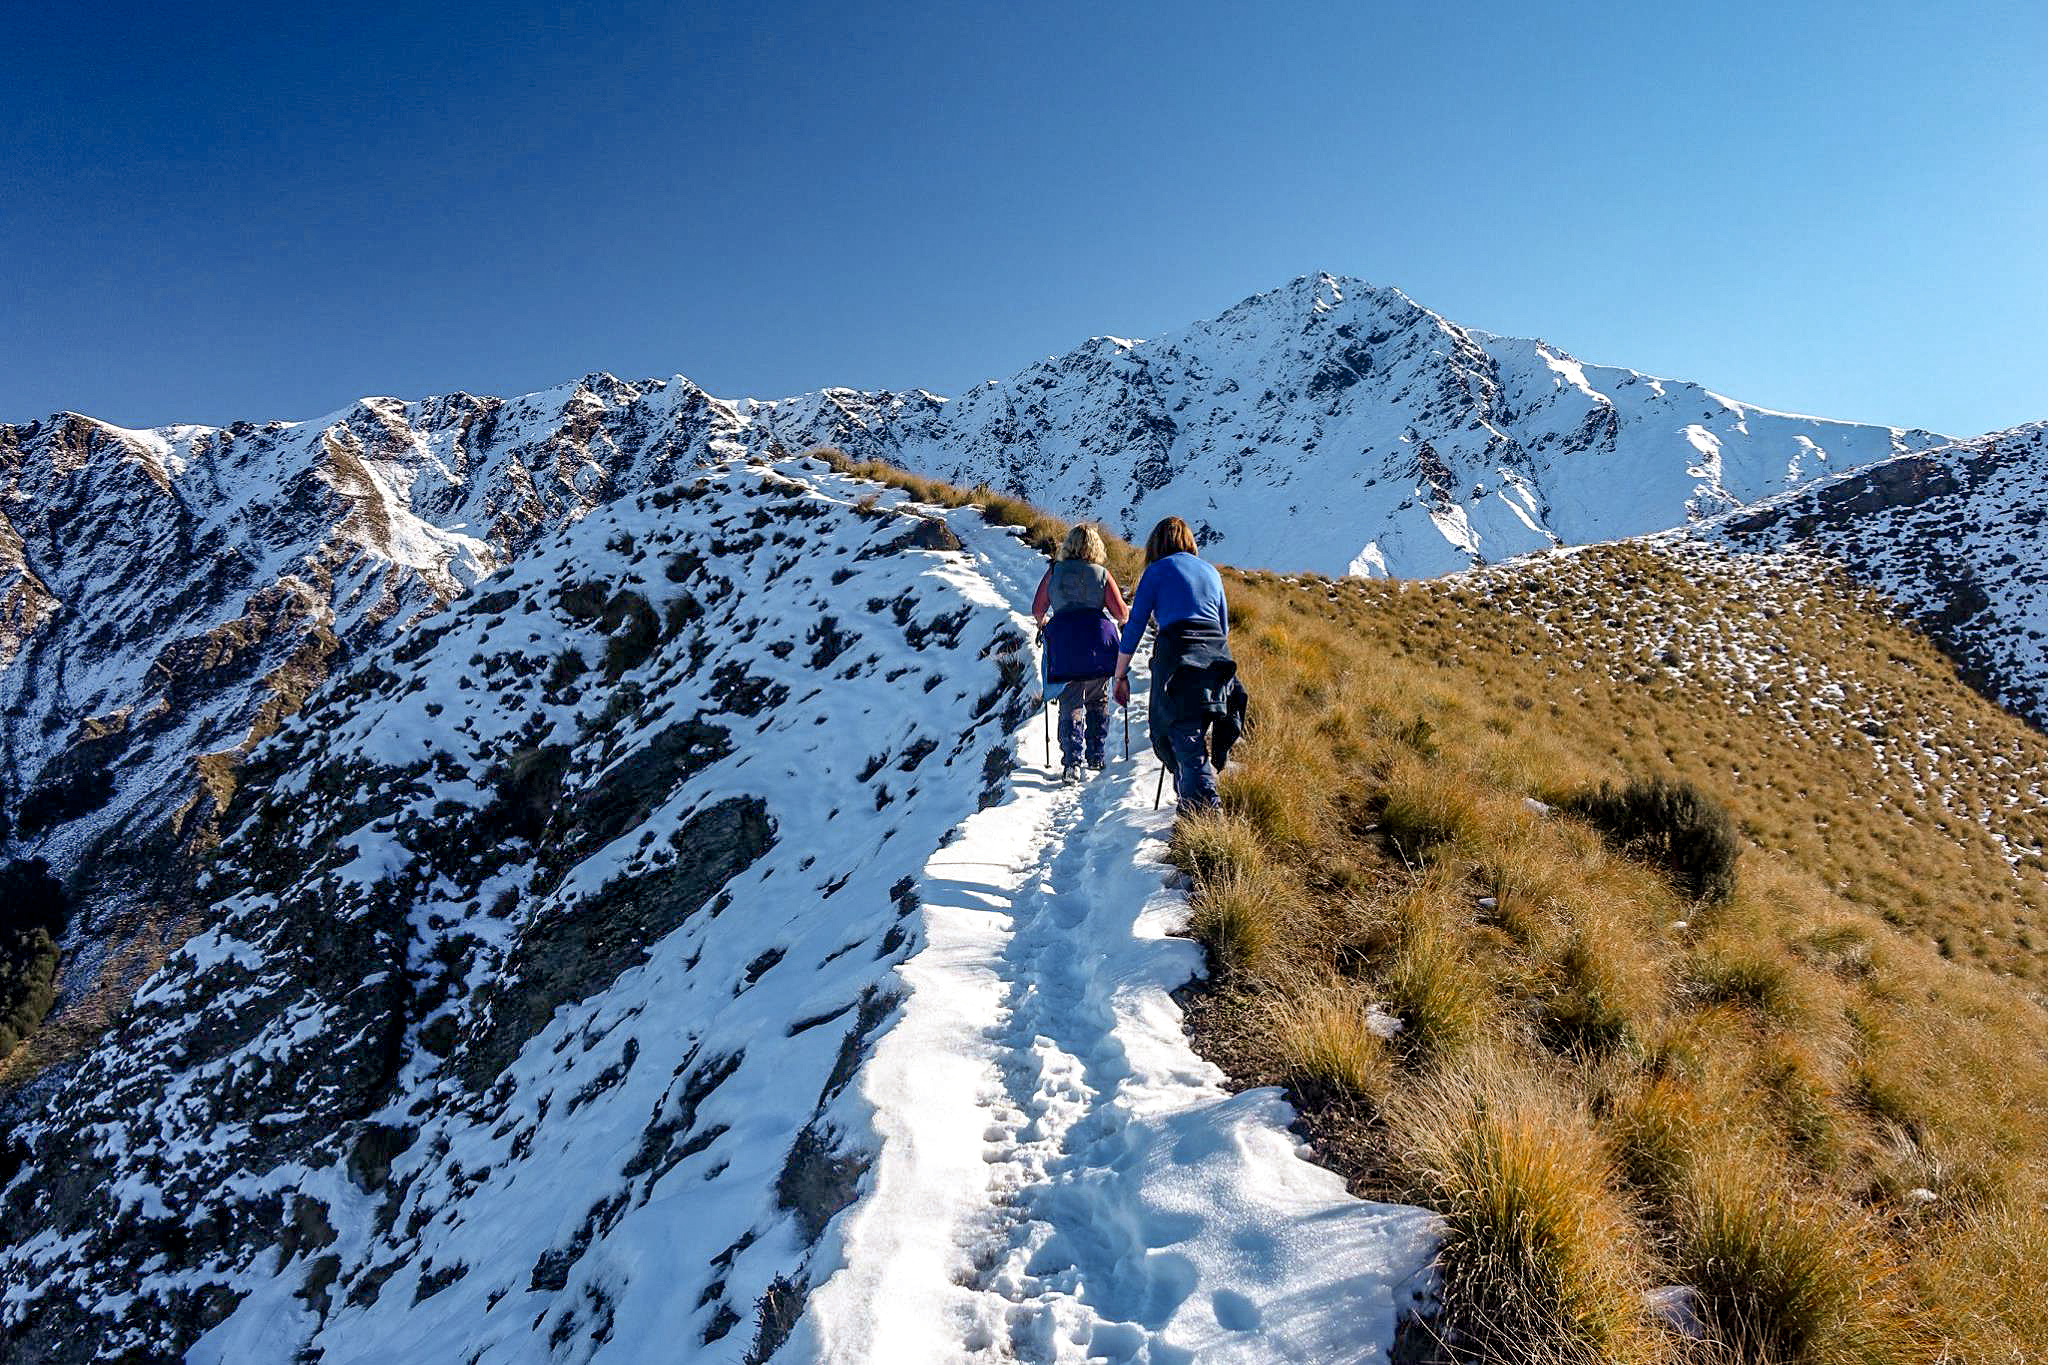 Two female hikers climbing up a snowy ridge with Ben Lomond in the background